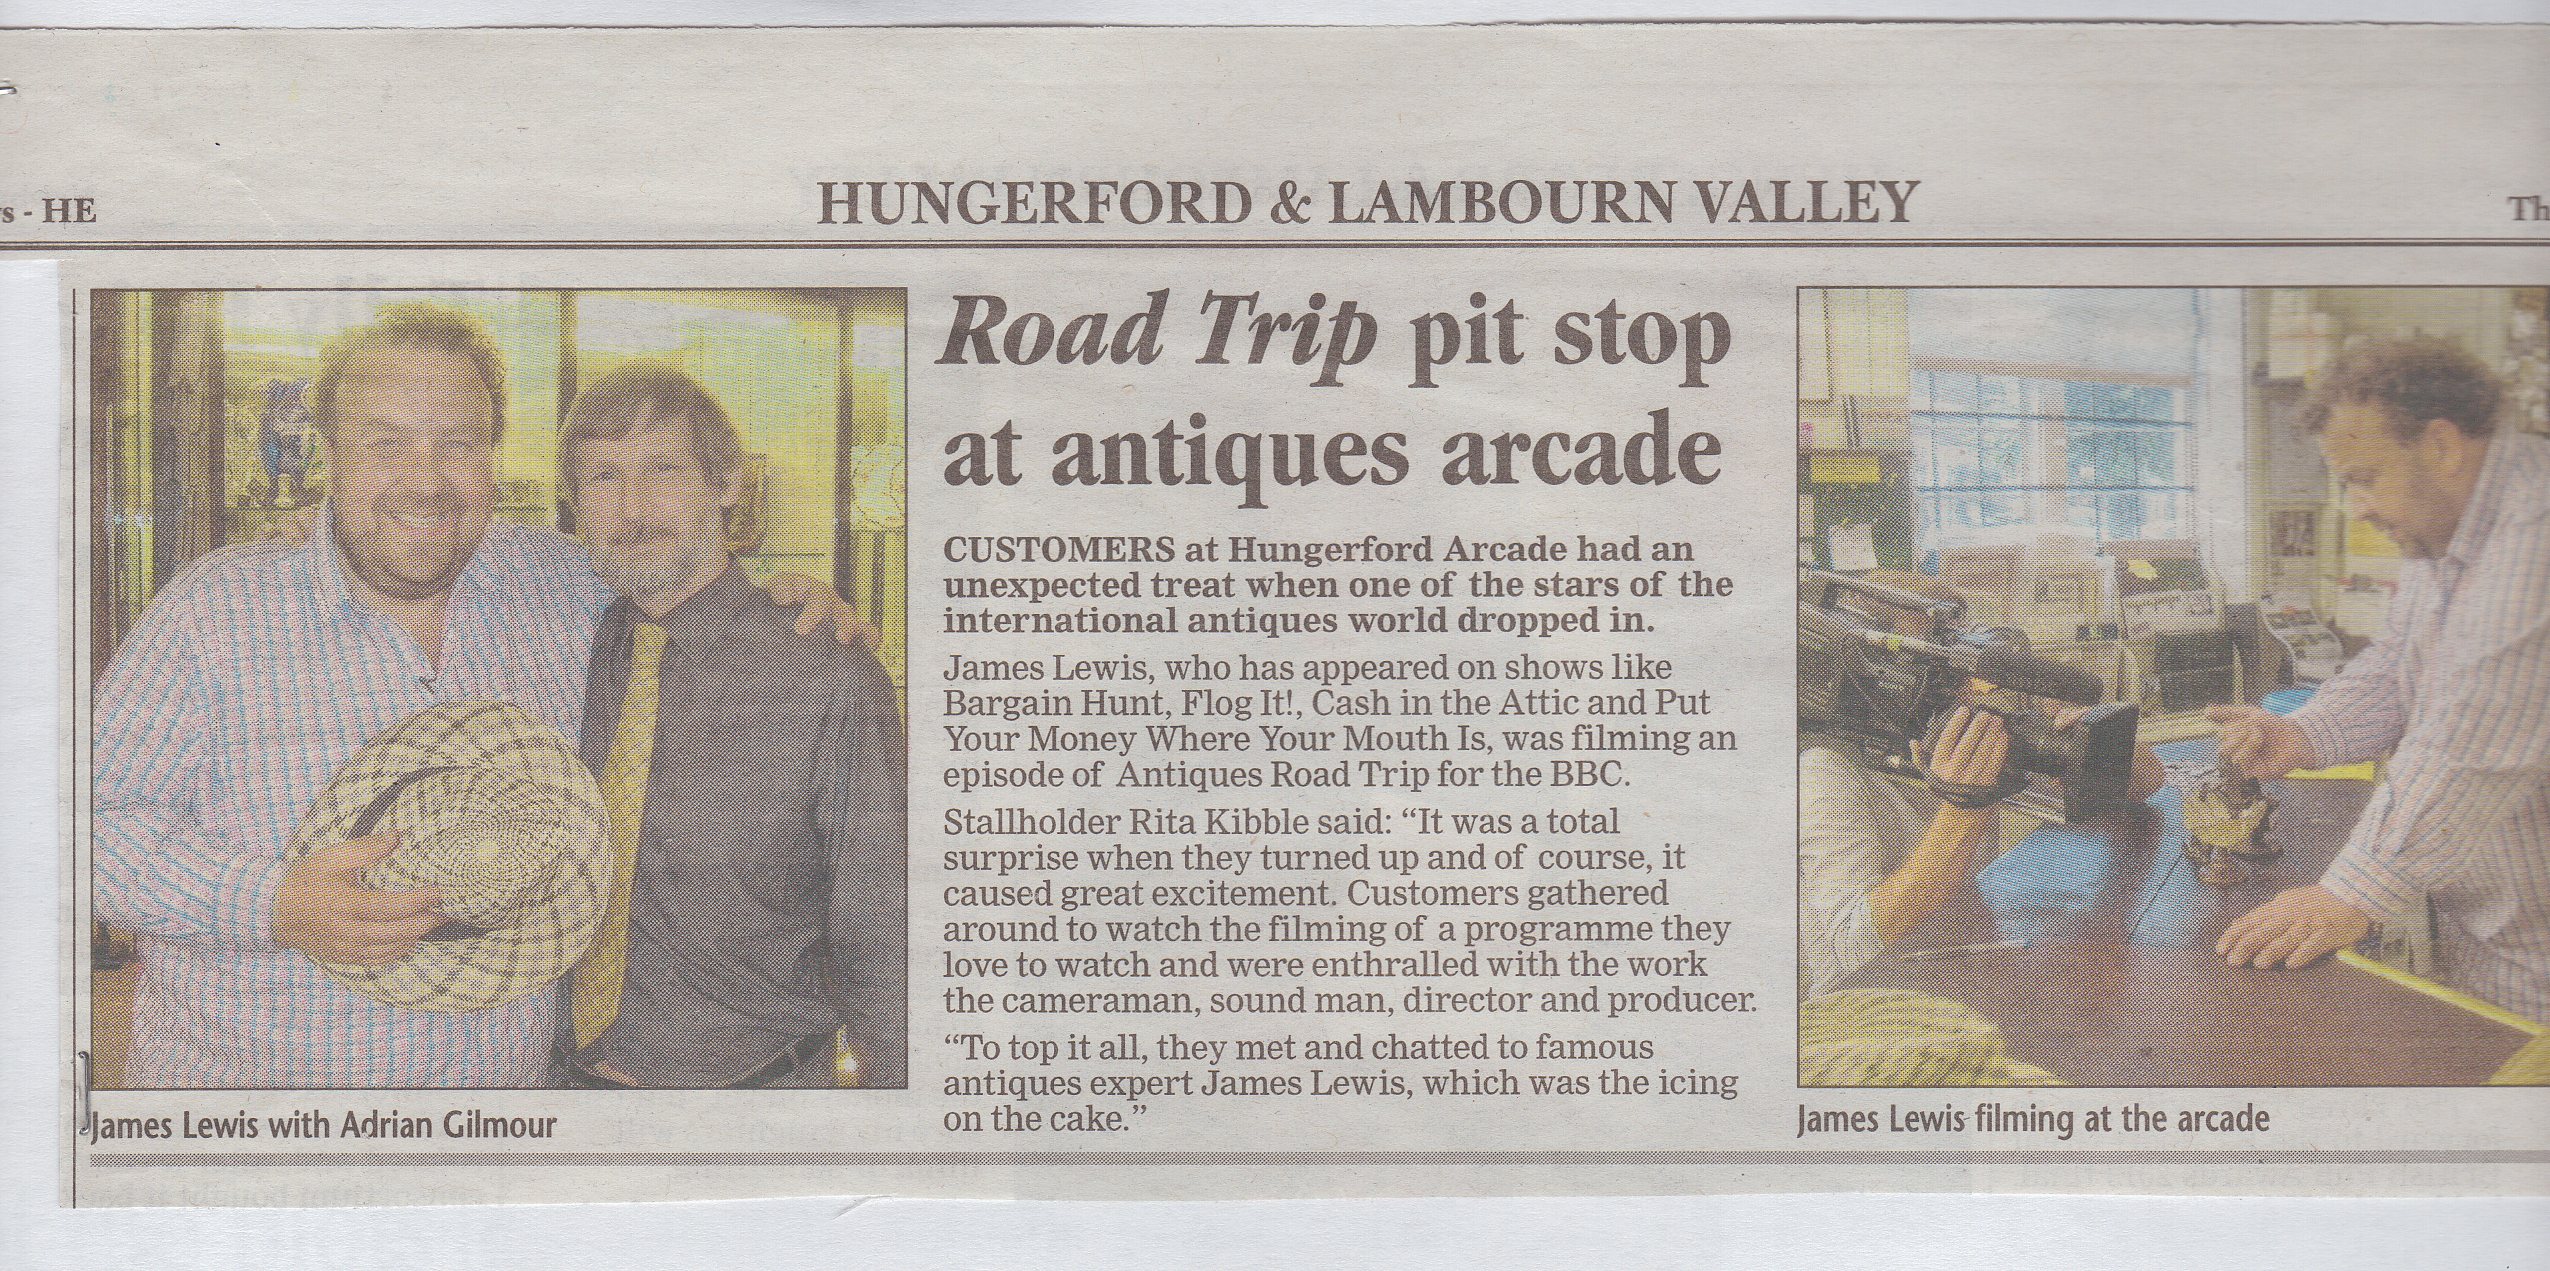 Antiques Road Trip at Hungerford Arcade